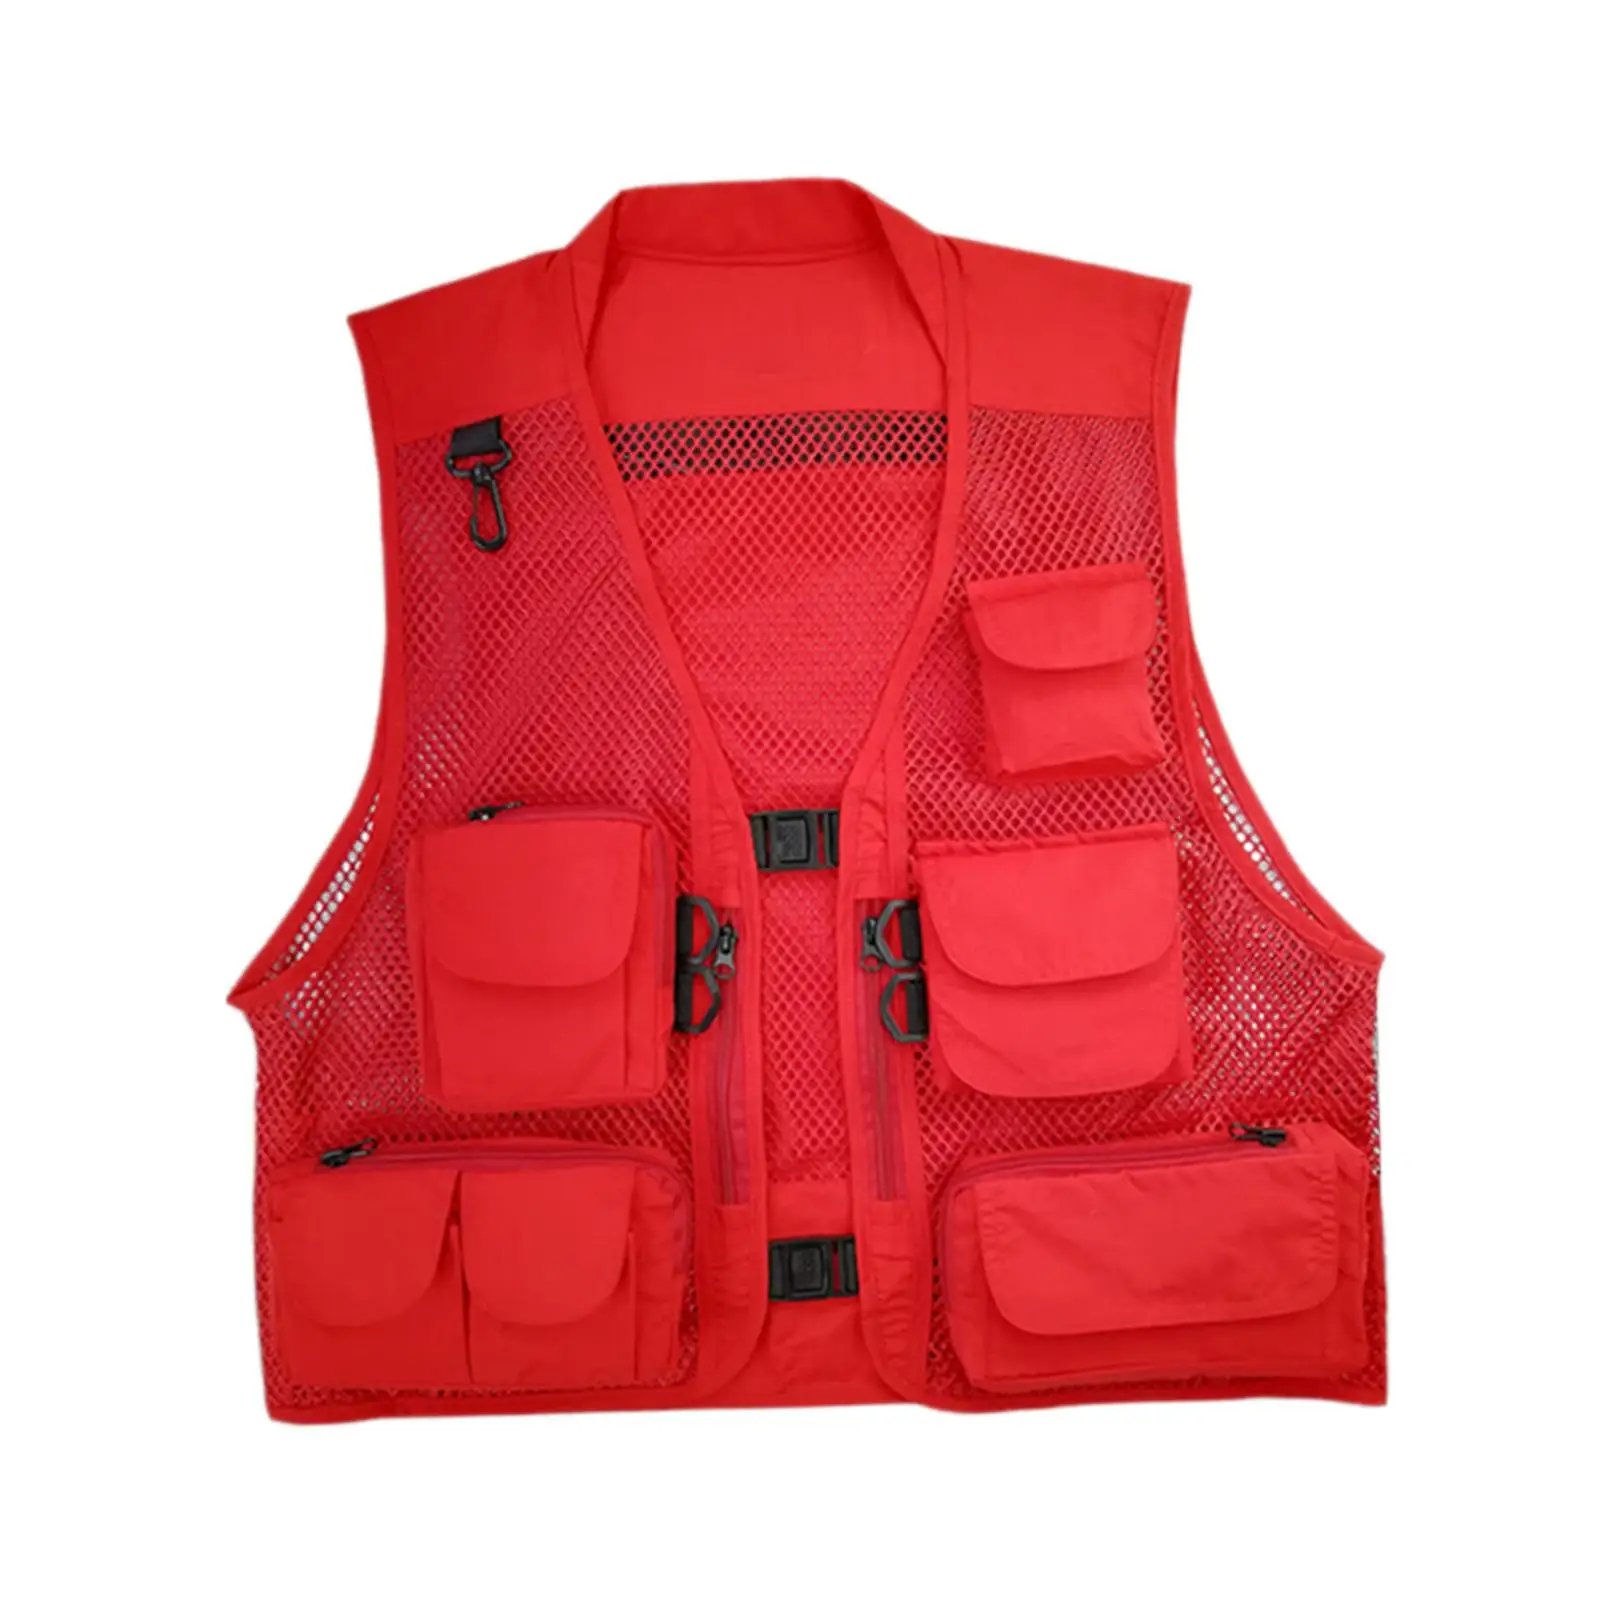 Men Mesh Camping Fishing Vest Multiple Pockets Red for Sightseeing,Traveling